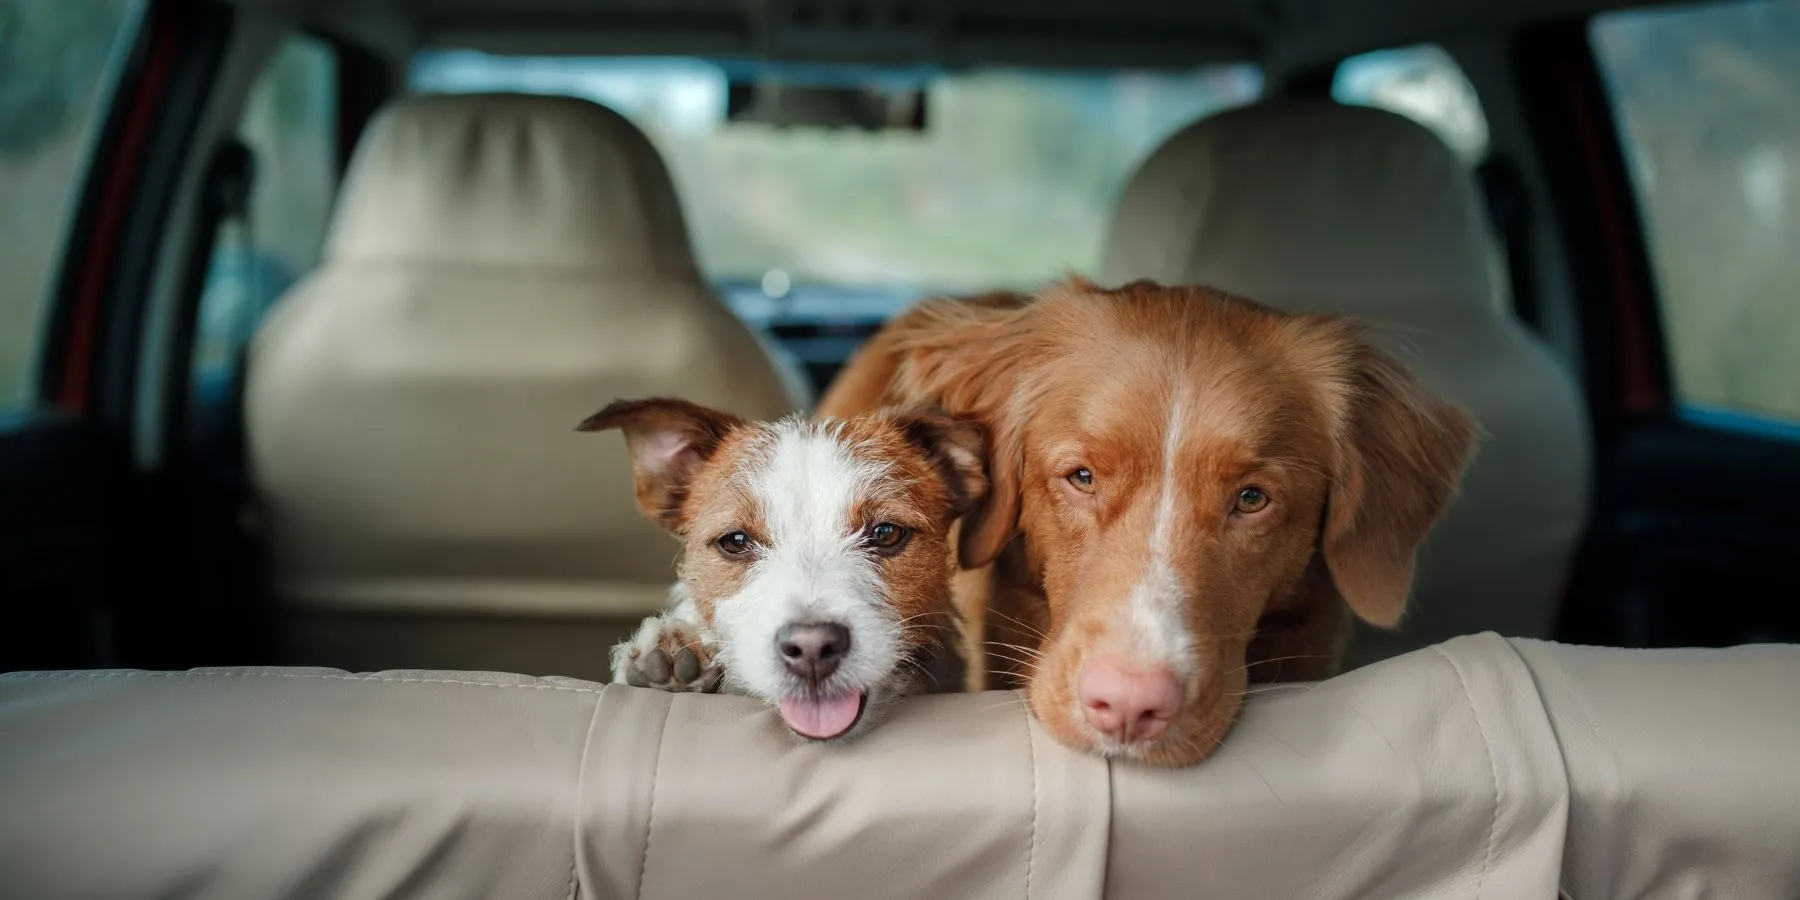 What to do If you See a Dog in a Hot Car